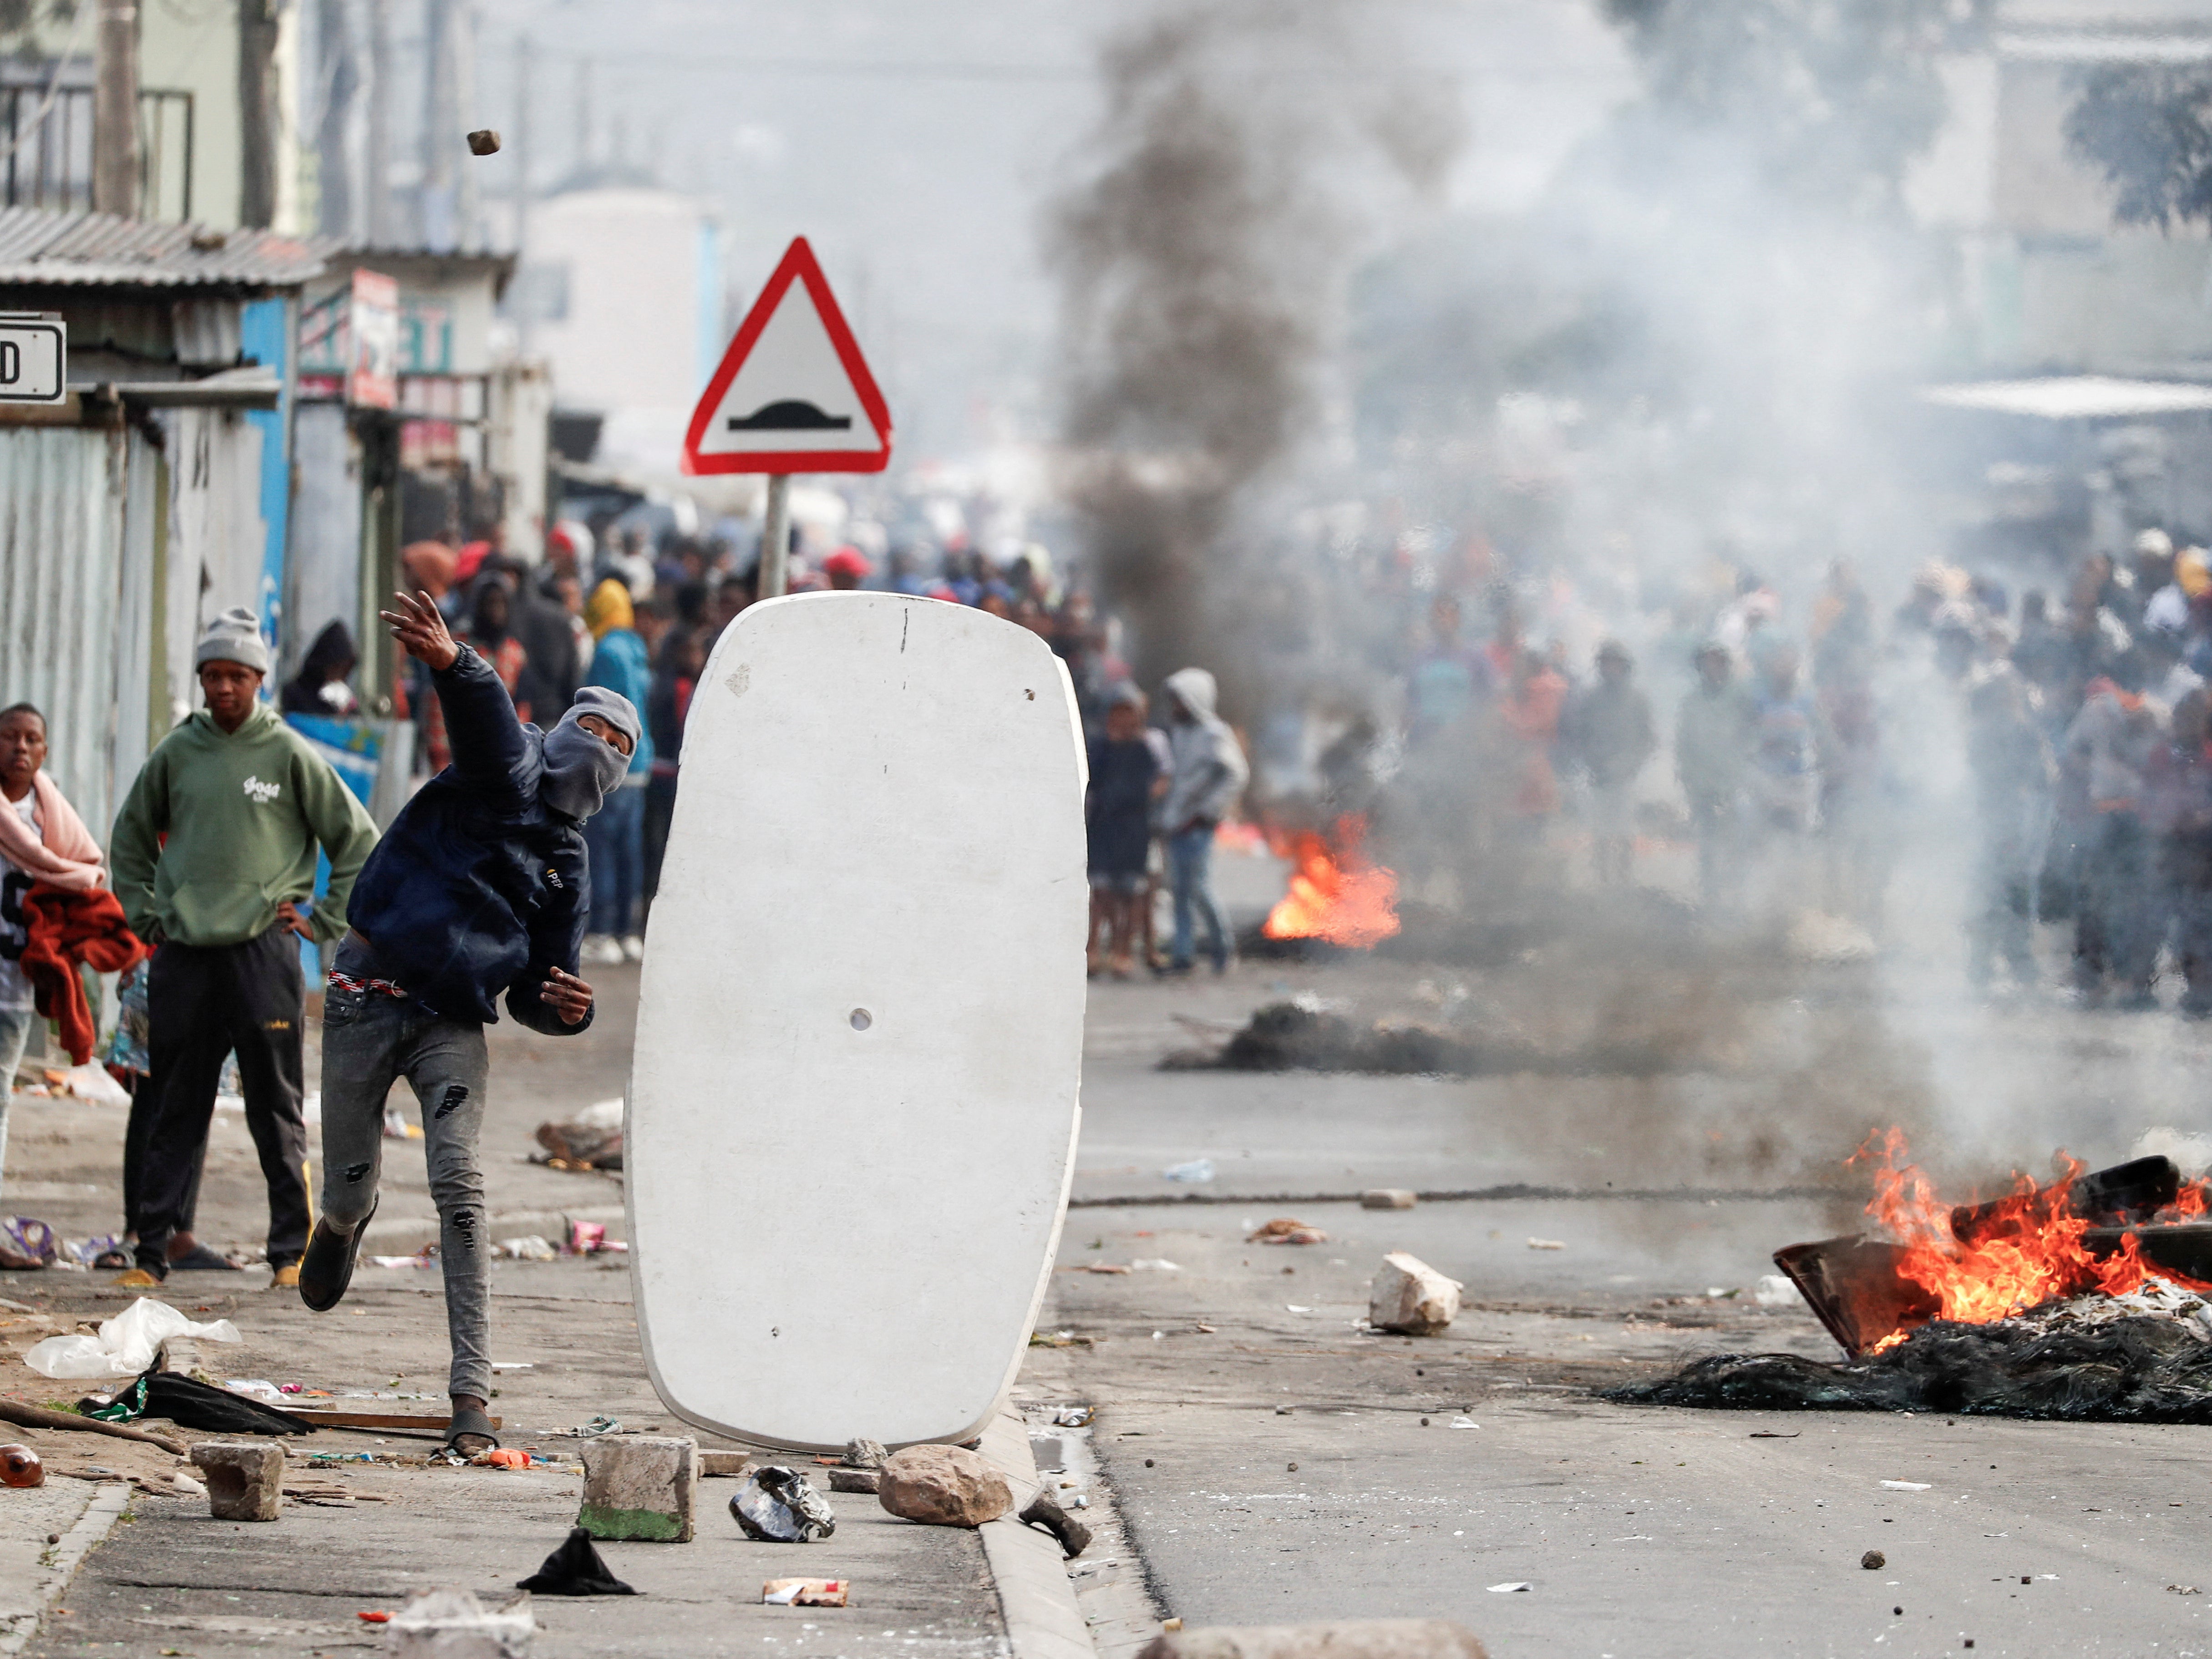 Residents of Masiphumelele throw rocks at police amidst an ongoing strike by taxi operators